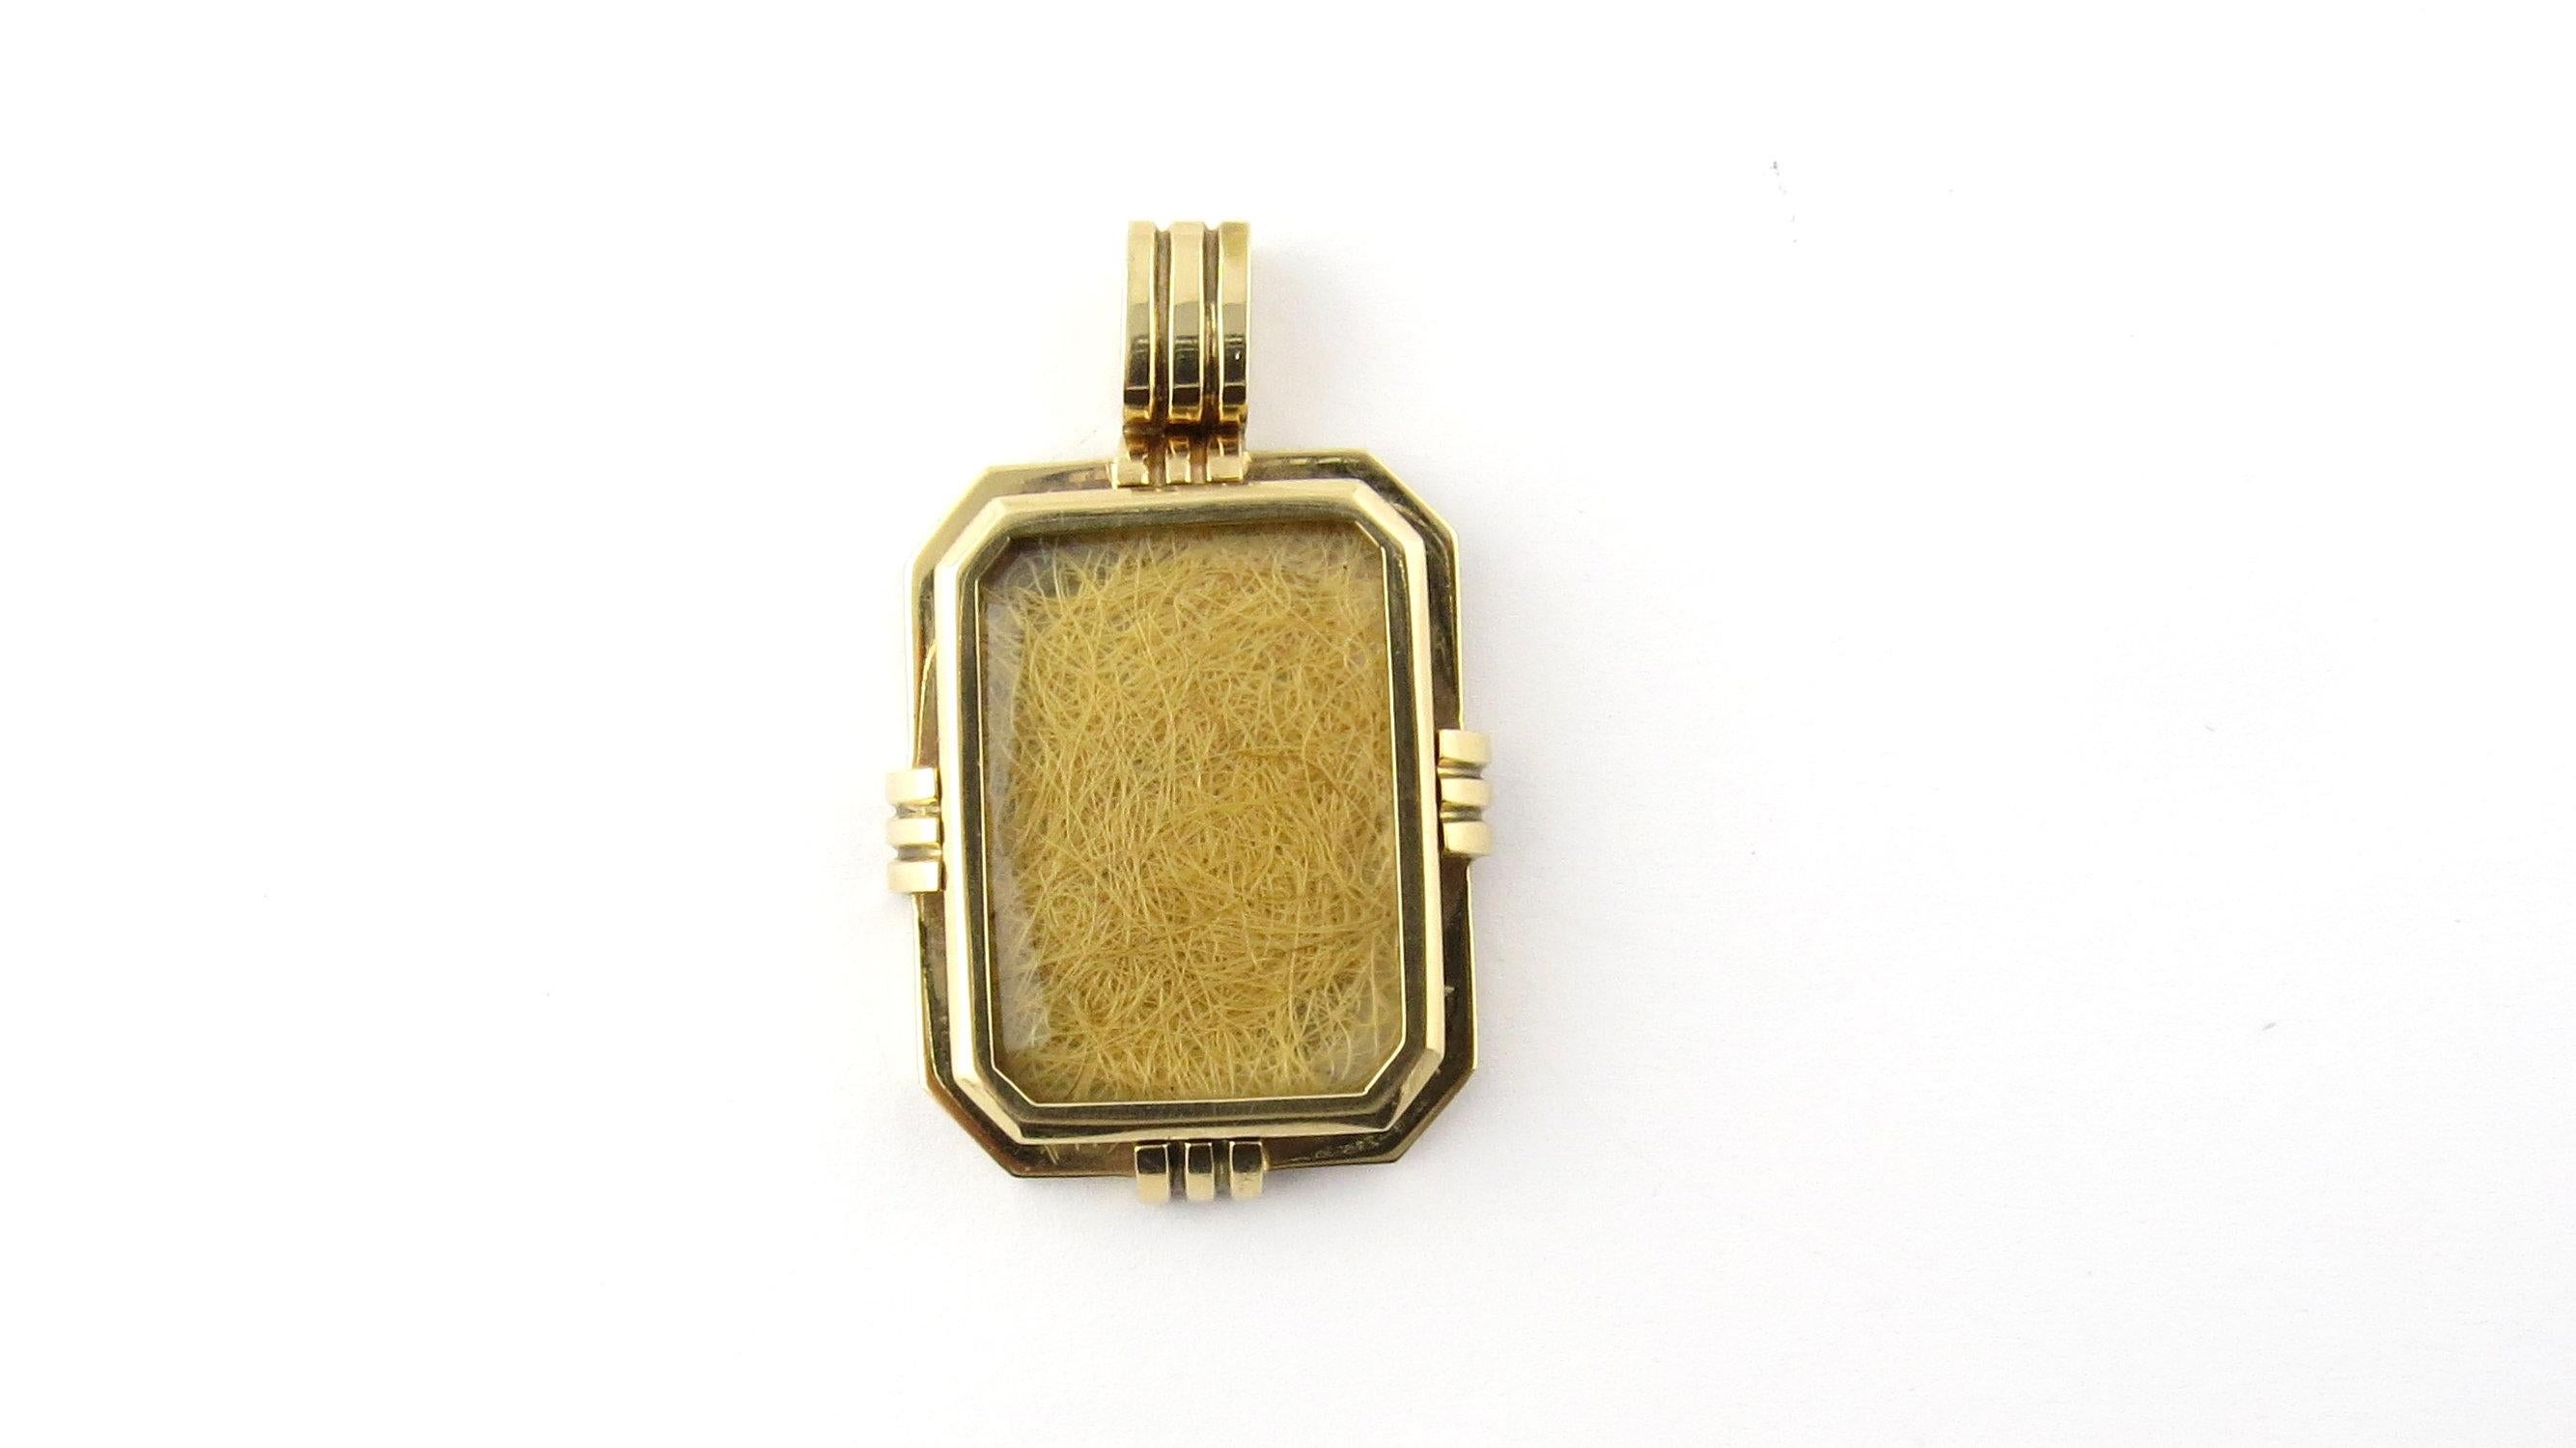 Antique Victorian 14 Karat Yellow Gold Mourning Hair Locket- 
This exceptional Victorian mourning locket includes lock of hair visible through its glass front. Beautifully detailed in 14K yellow gold. 
Size: 40 mm x 26 mm 
Weight: 9.4 dwt. / 14.7